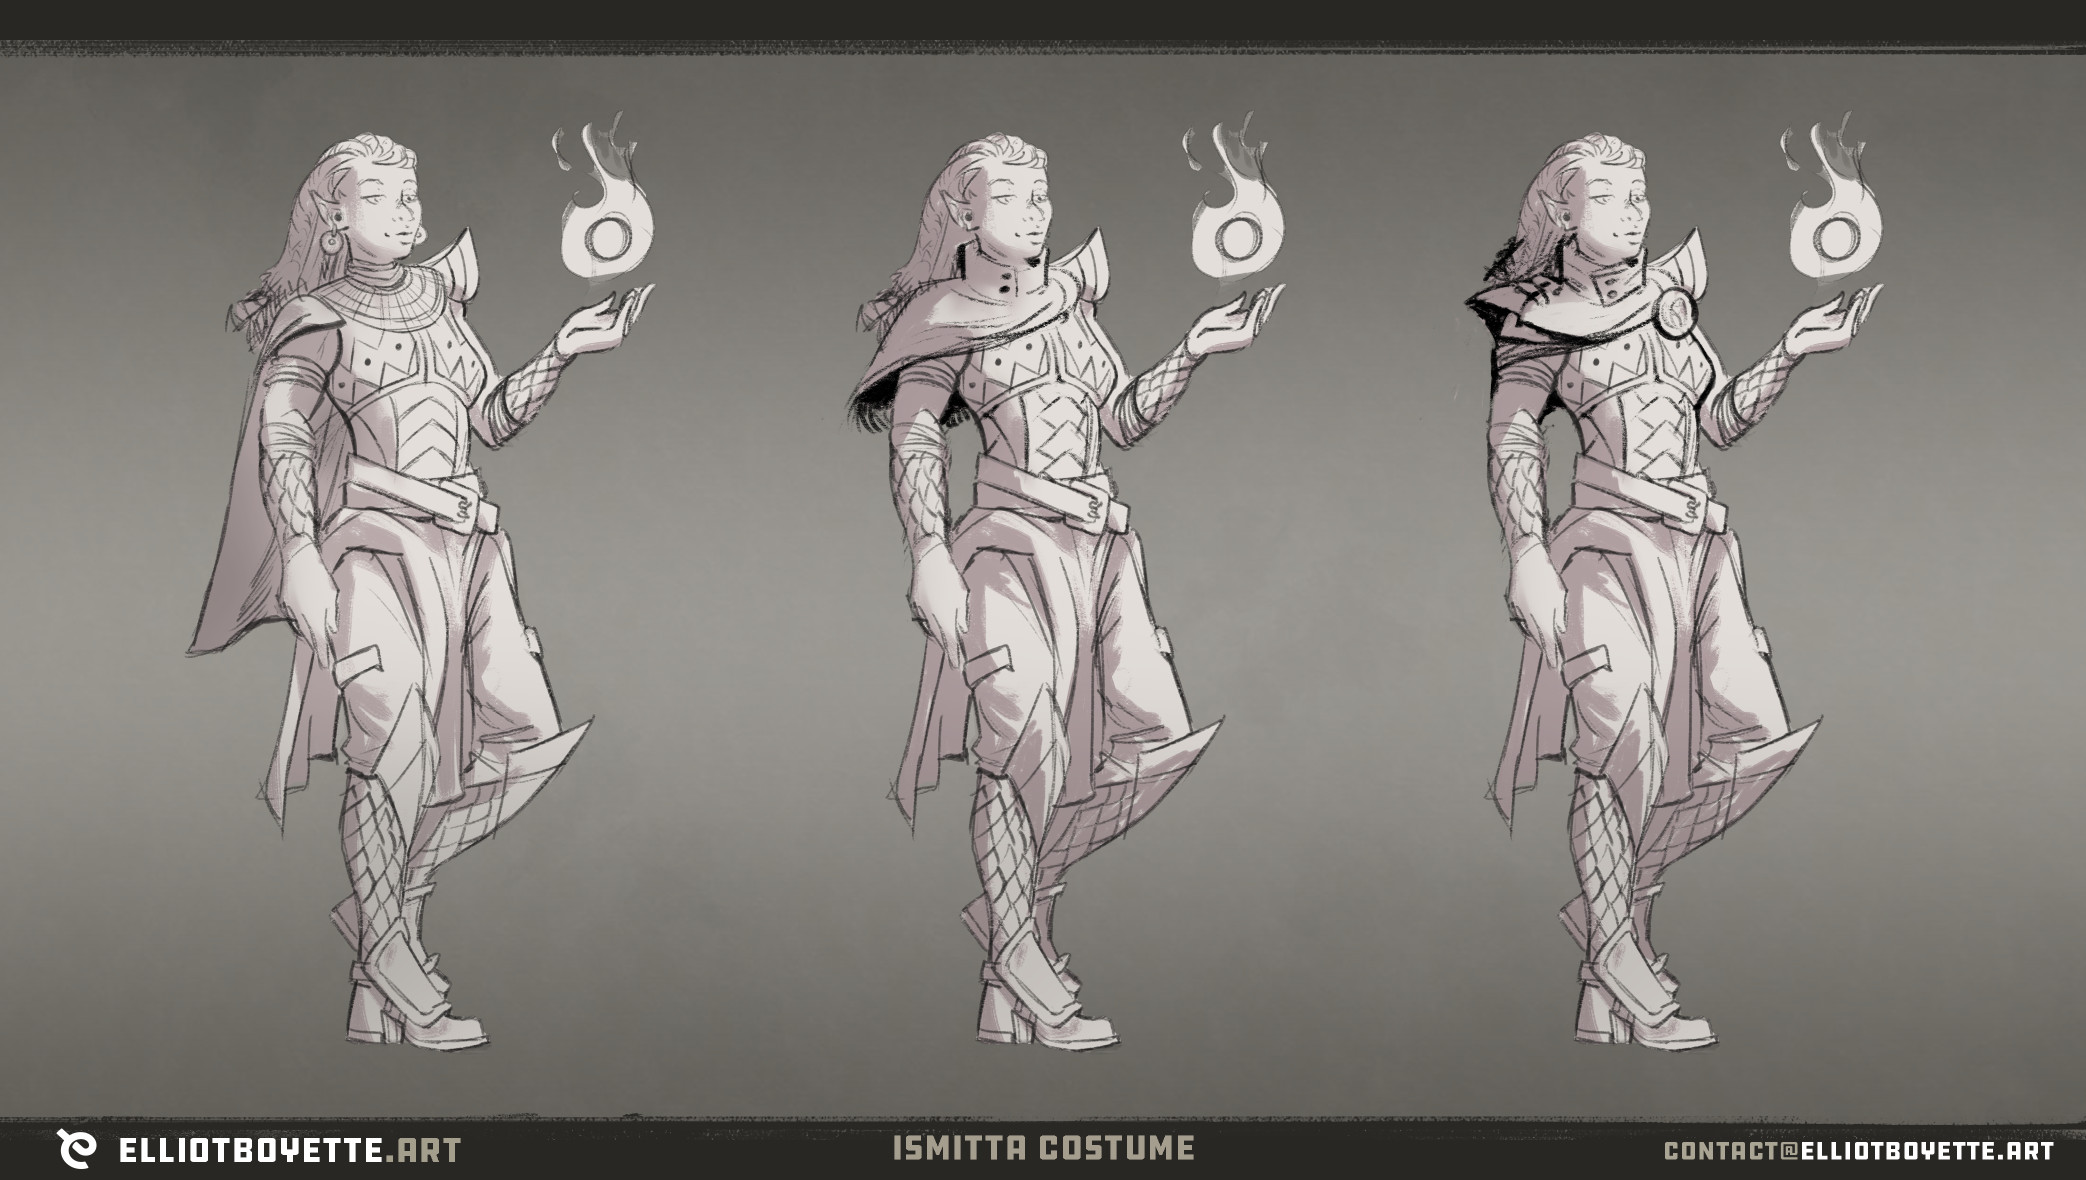 Finalizing the costume based on feedback and trying to convey the sorcerer aspects.